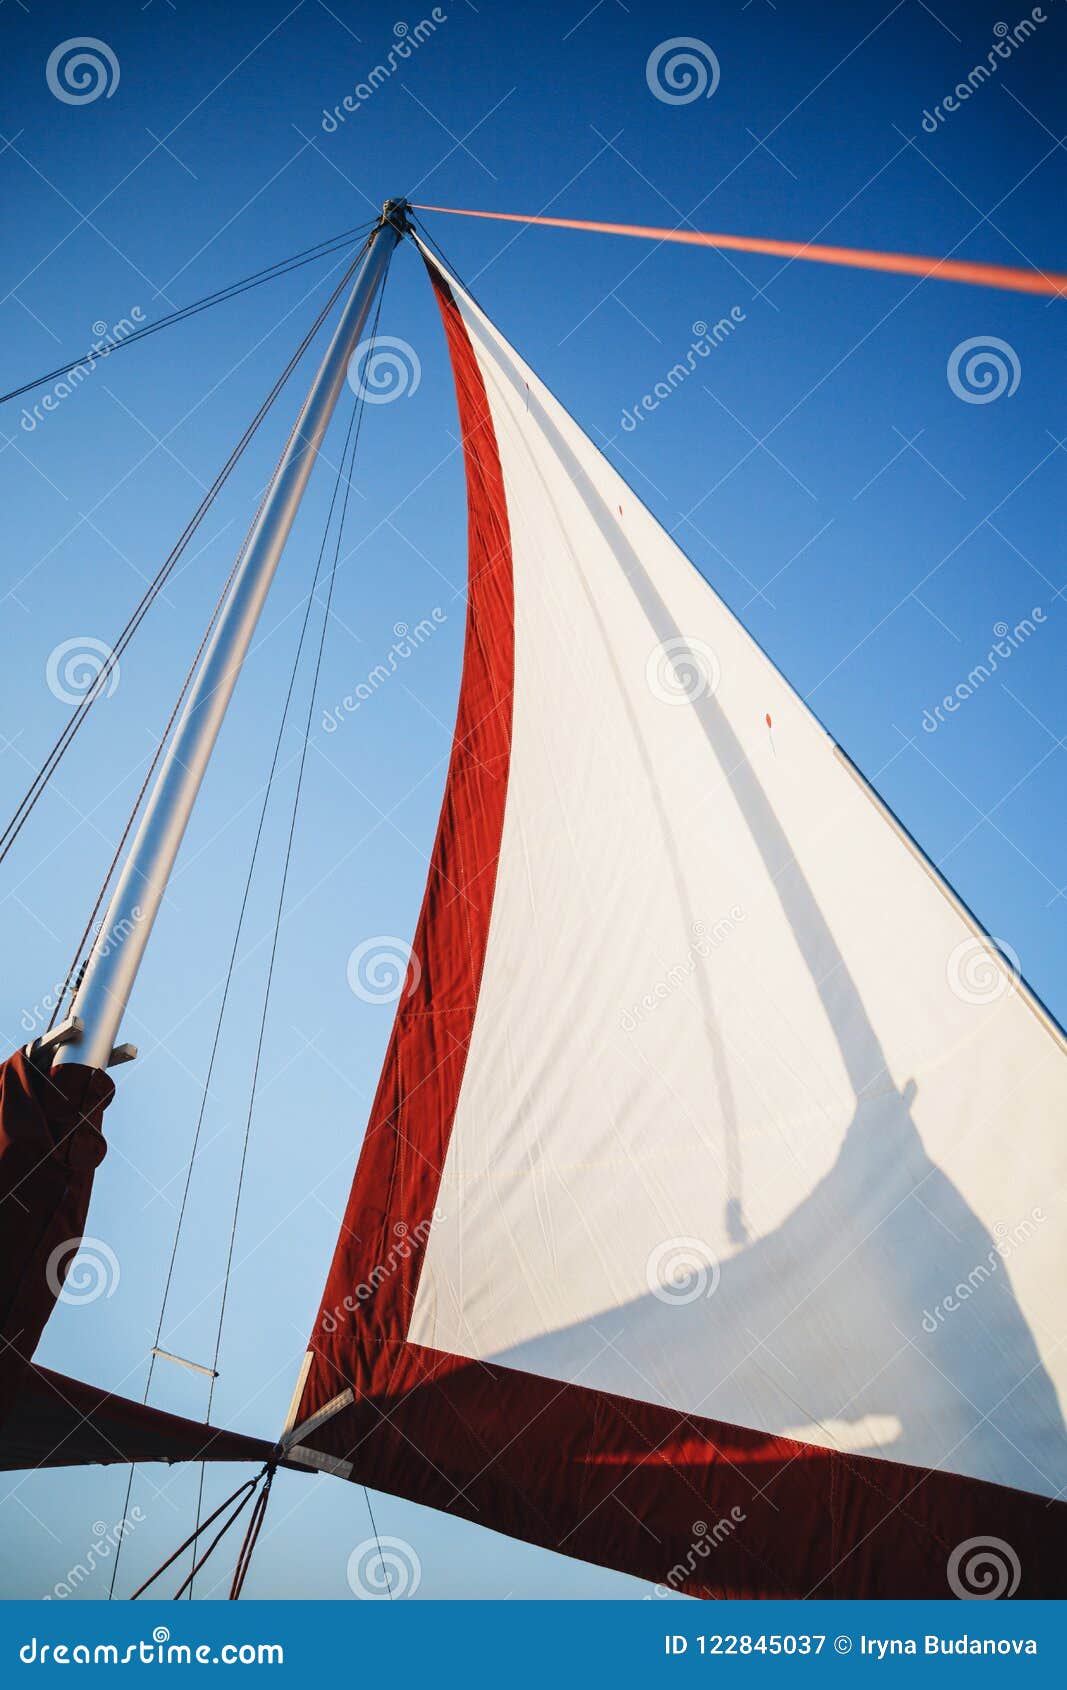 top of the sailboat, mast head, sail and nautical rope yacht detail. yachting, marine background